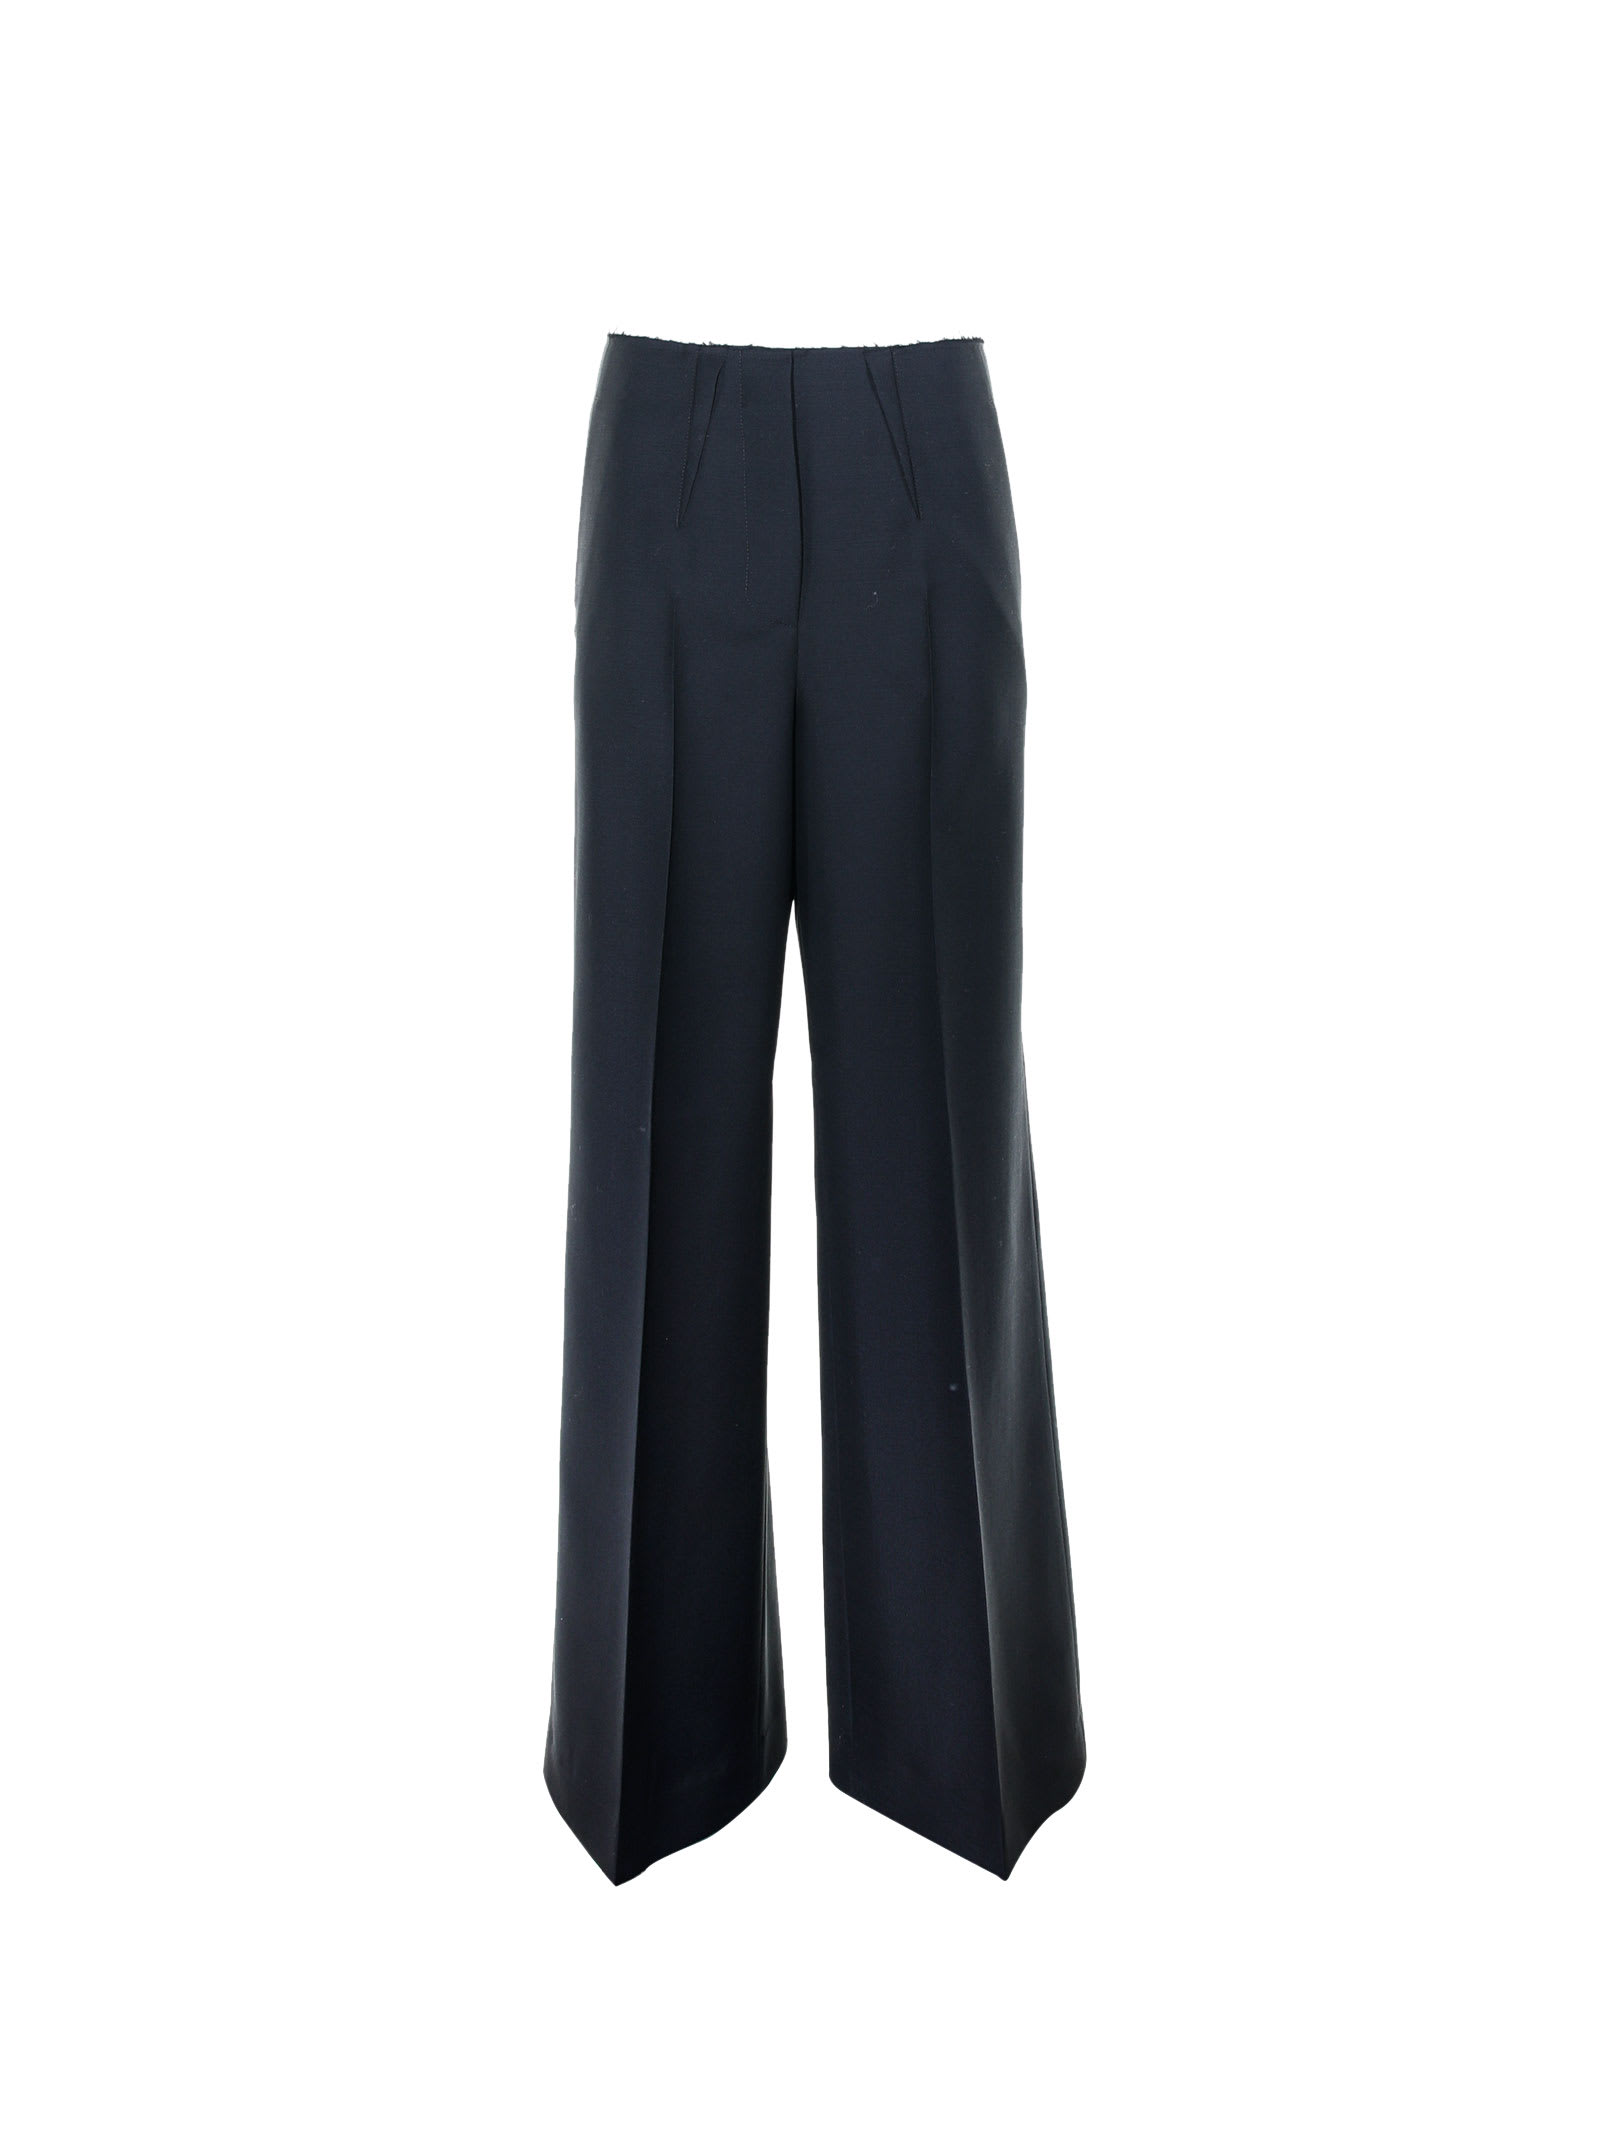 GIVENCHY FLARED TROUSERS WITH PLEATS